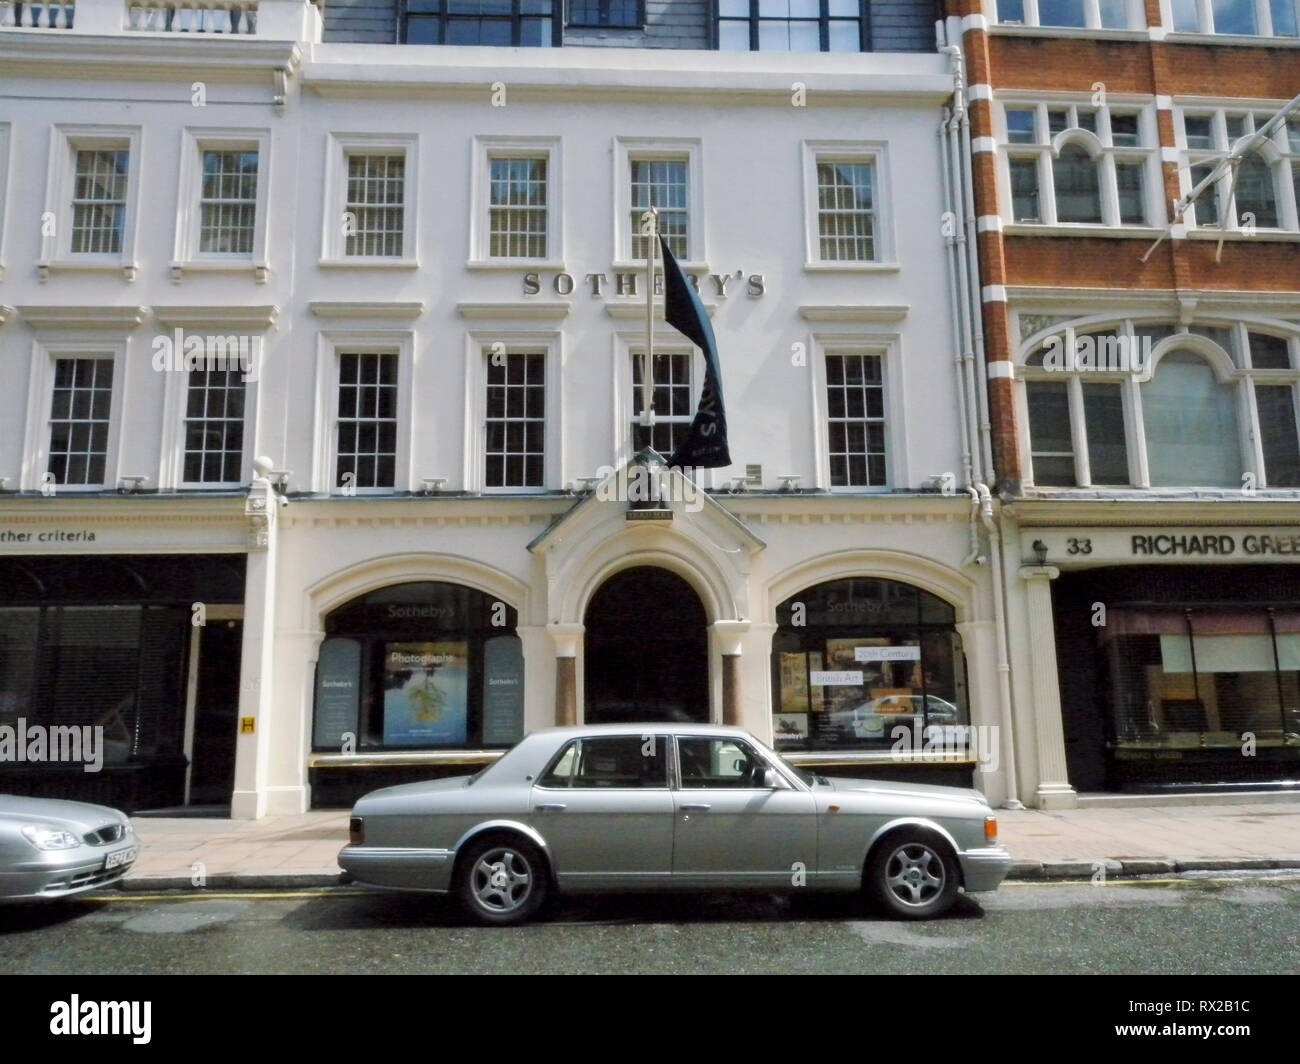 Sotheby's headquarters in London Mayfair area Stock Photo